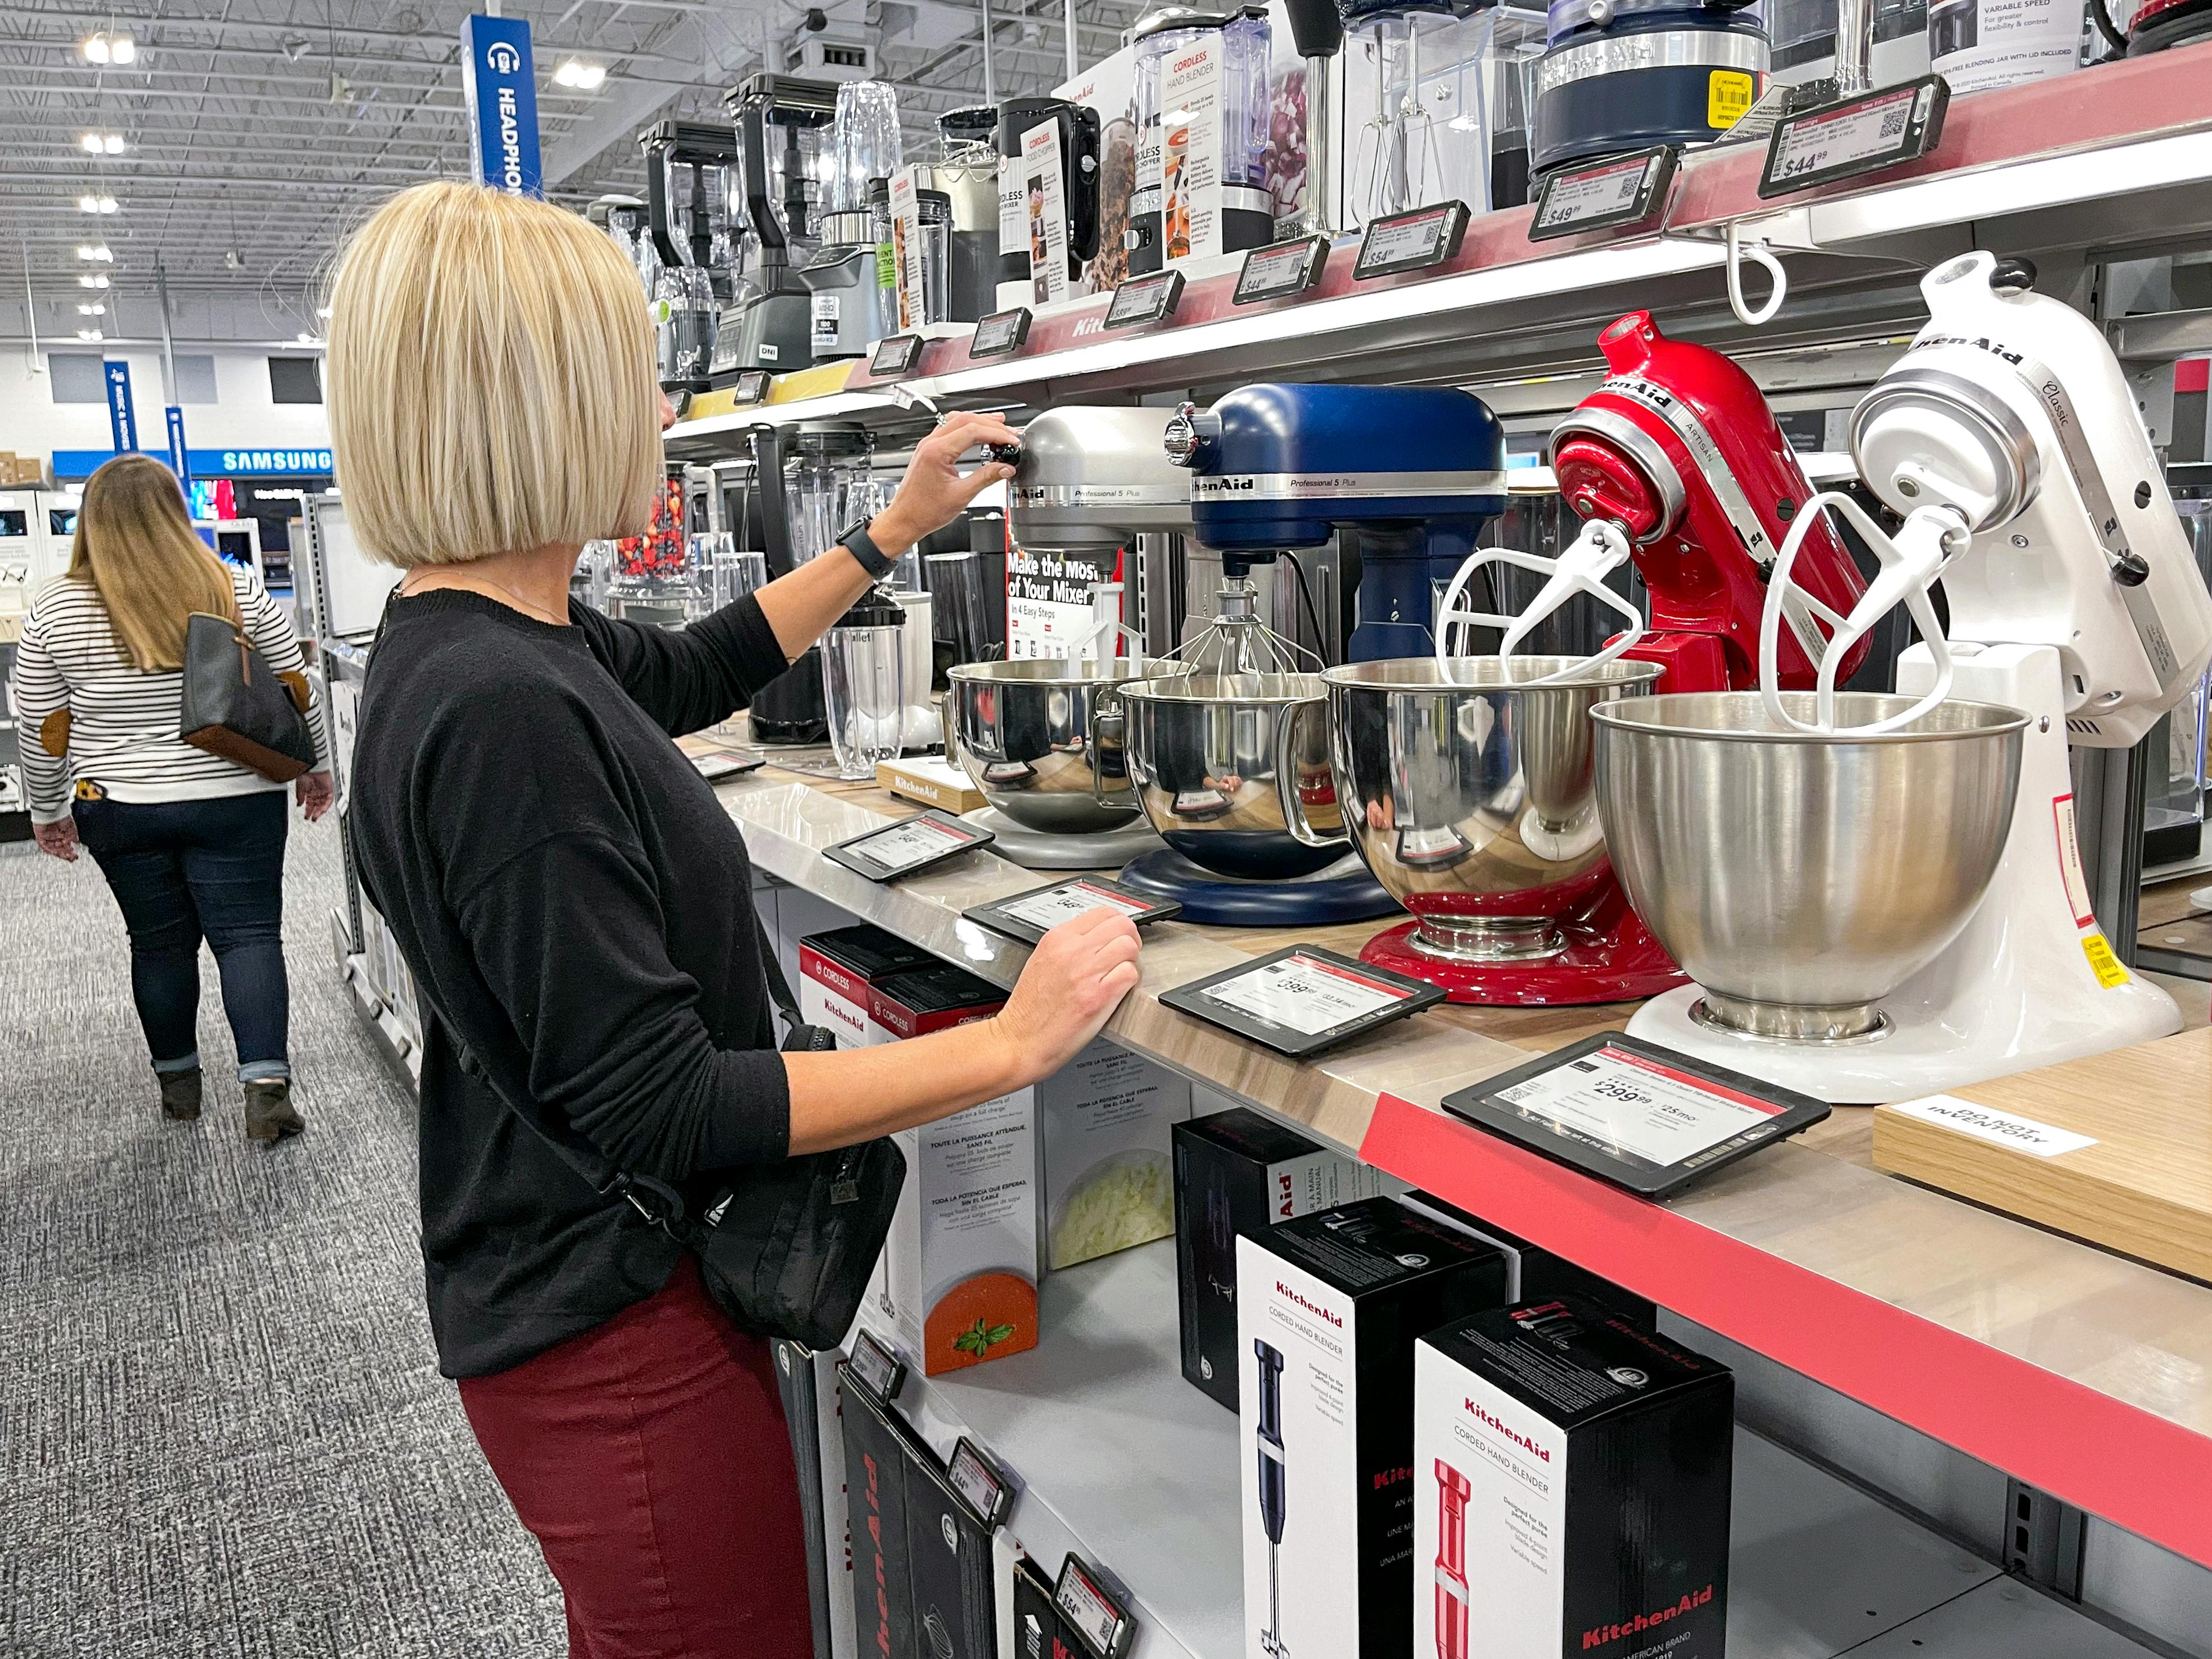 7 Tricks Finding a KitchenAid Mixer Sale - The Coupon Lady